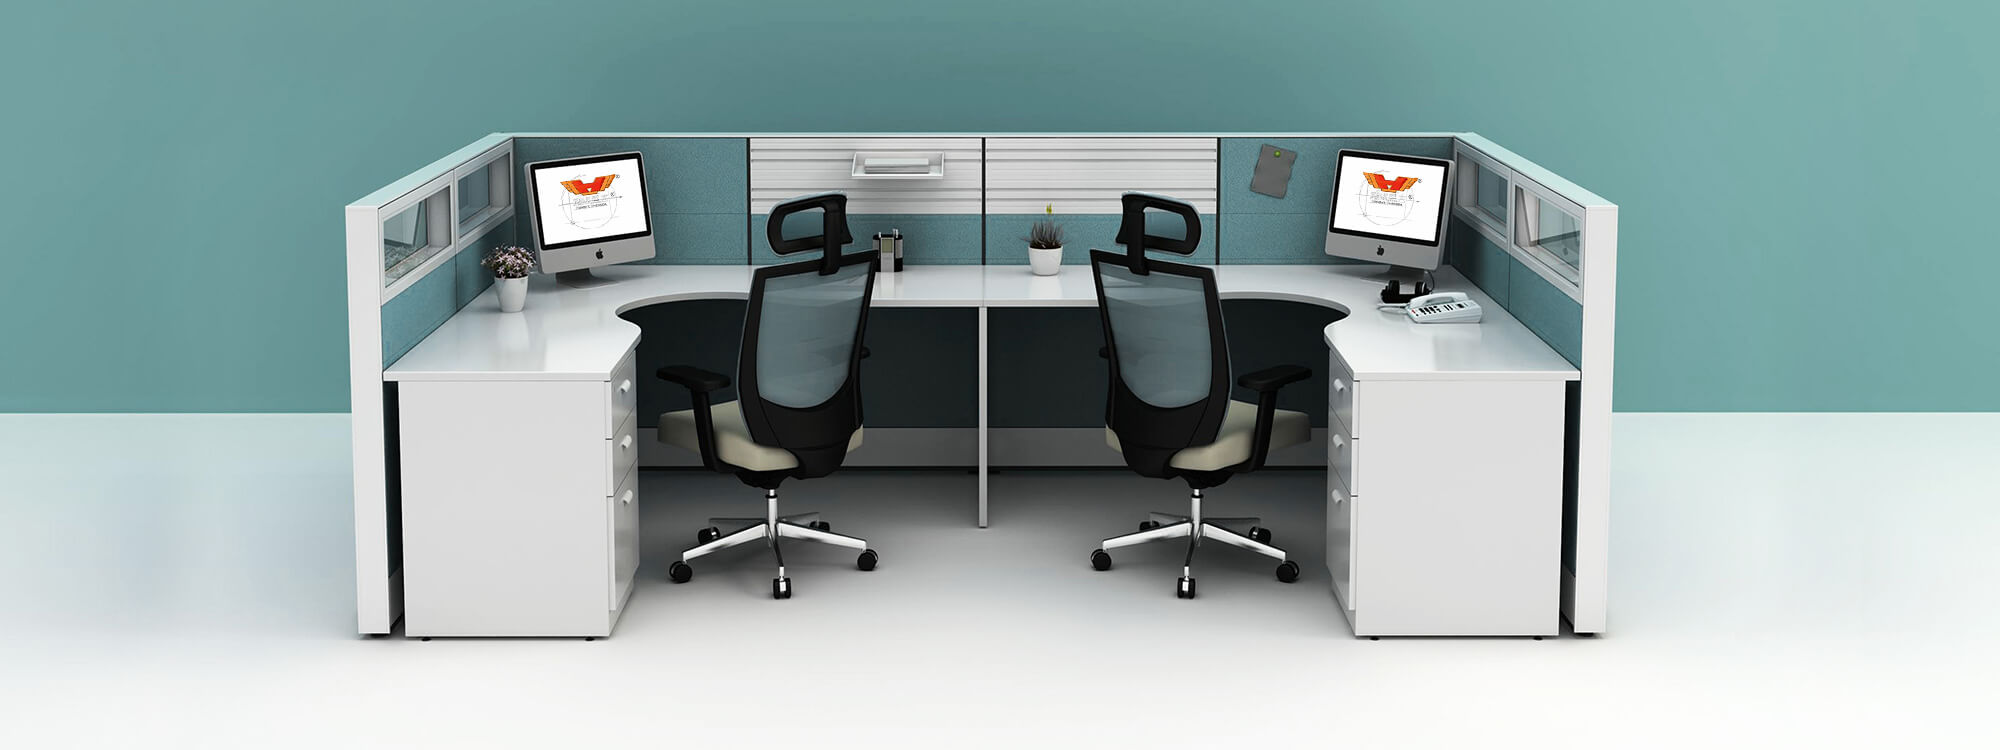 Modular Cubicle as a modular furniture can supports any office space design to help workplaces reach their full potential.